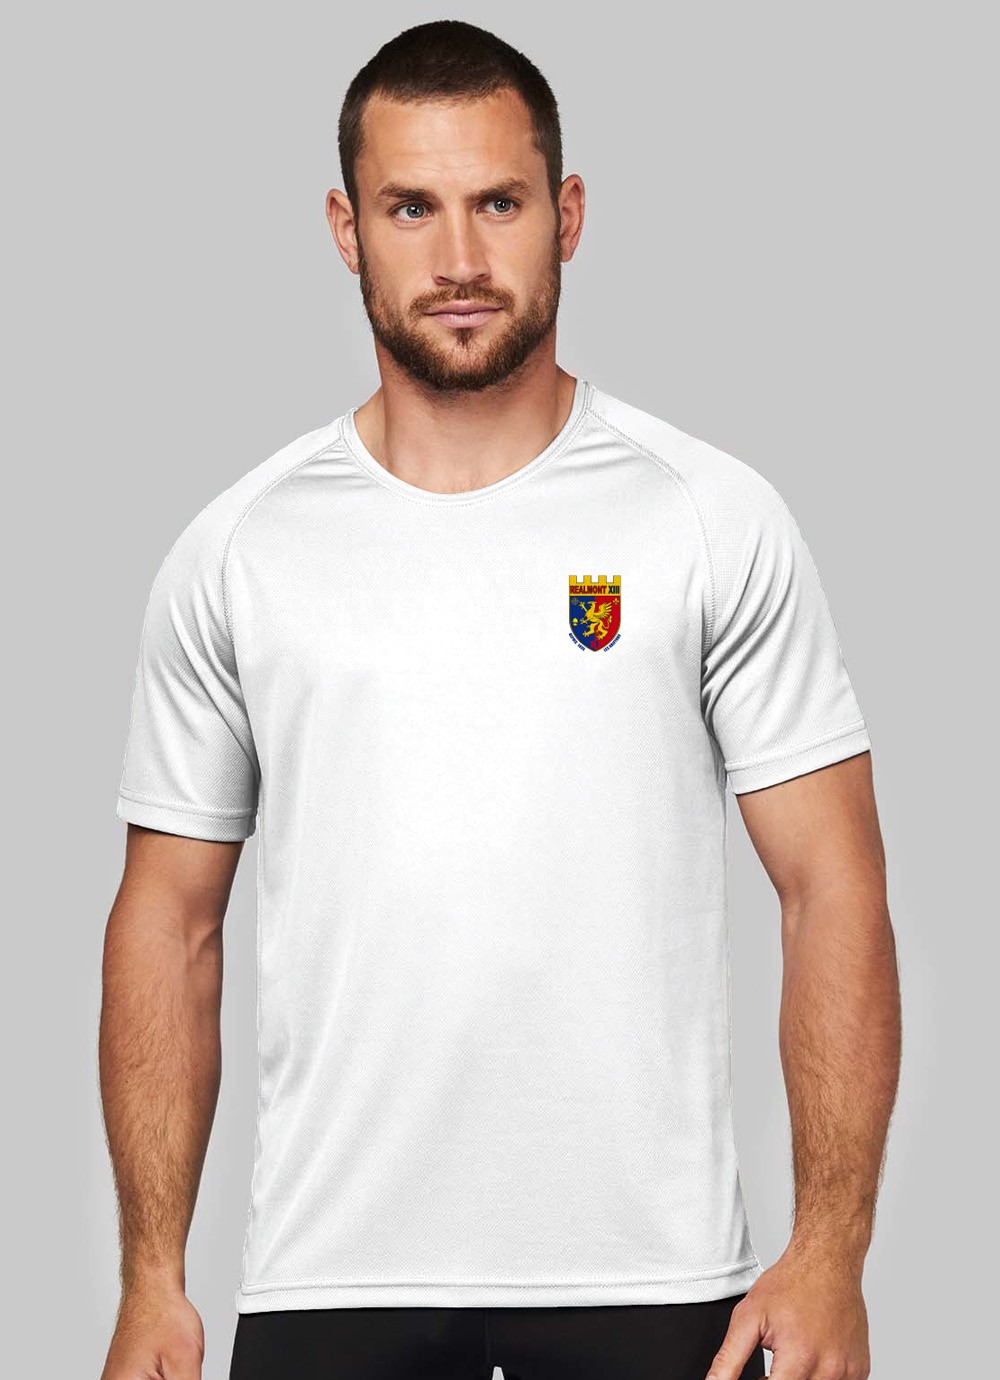 Tshirt sport homme Realmont XIII blanc